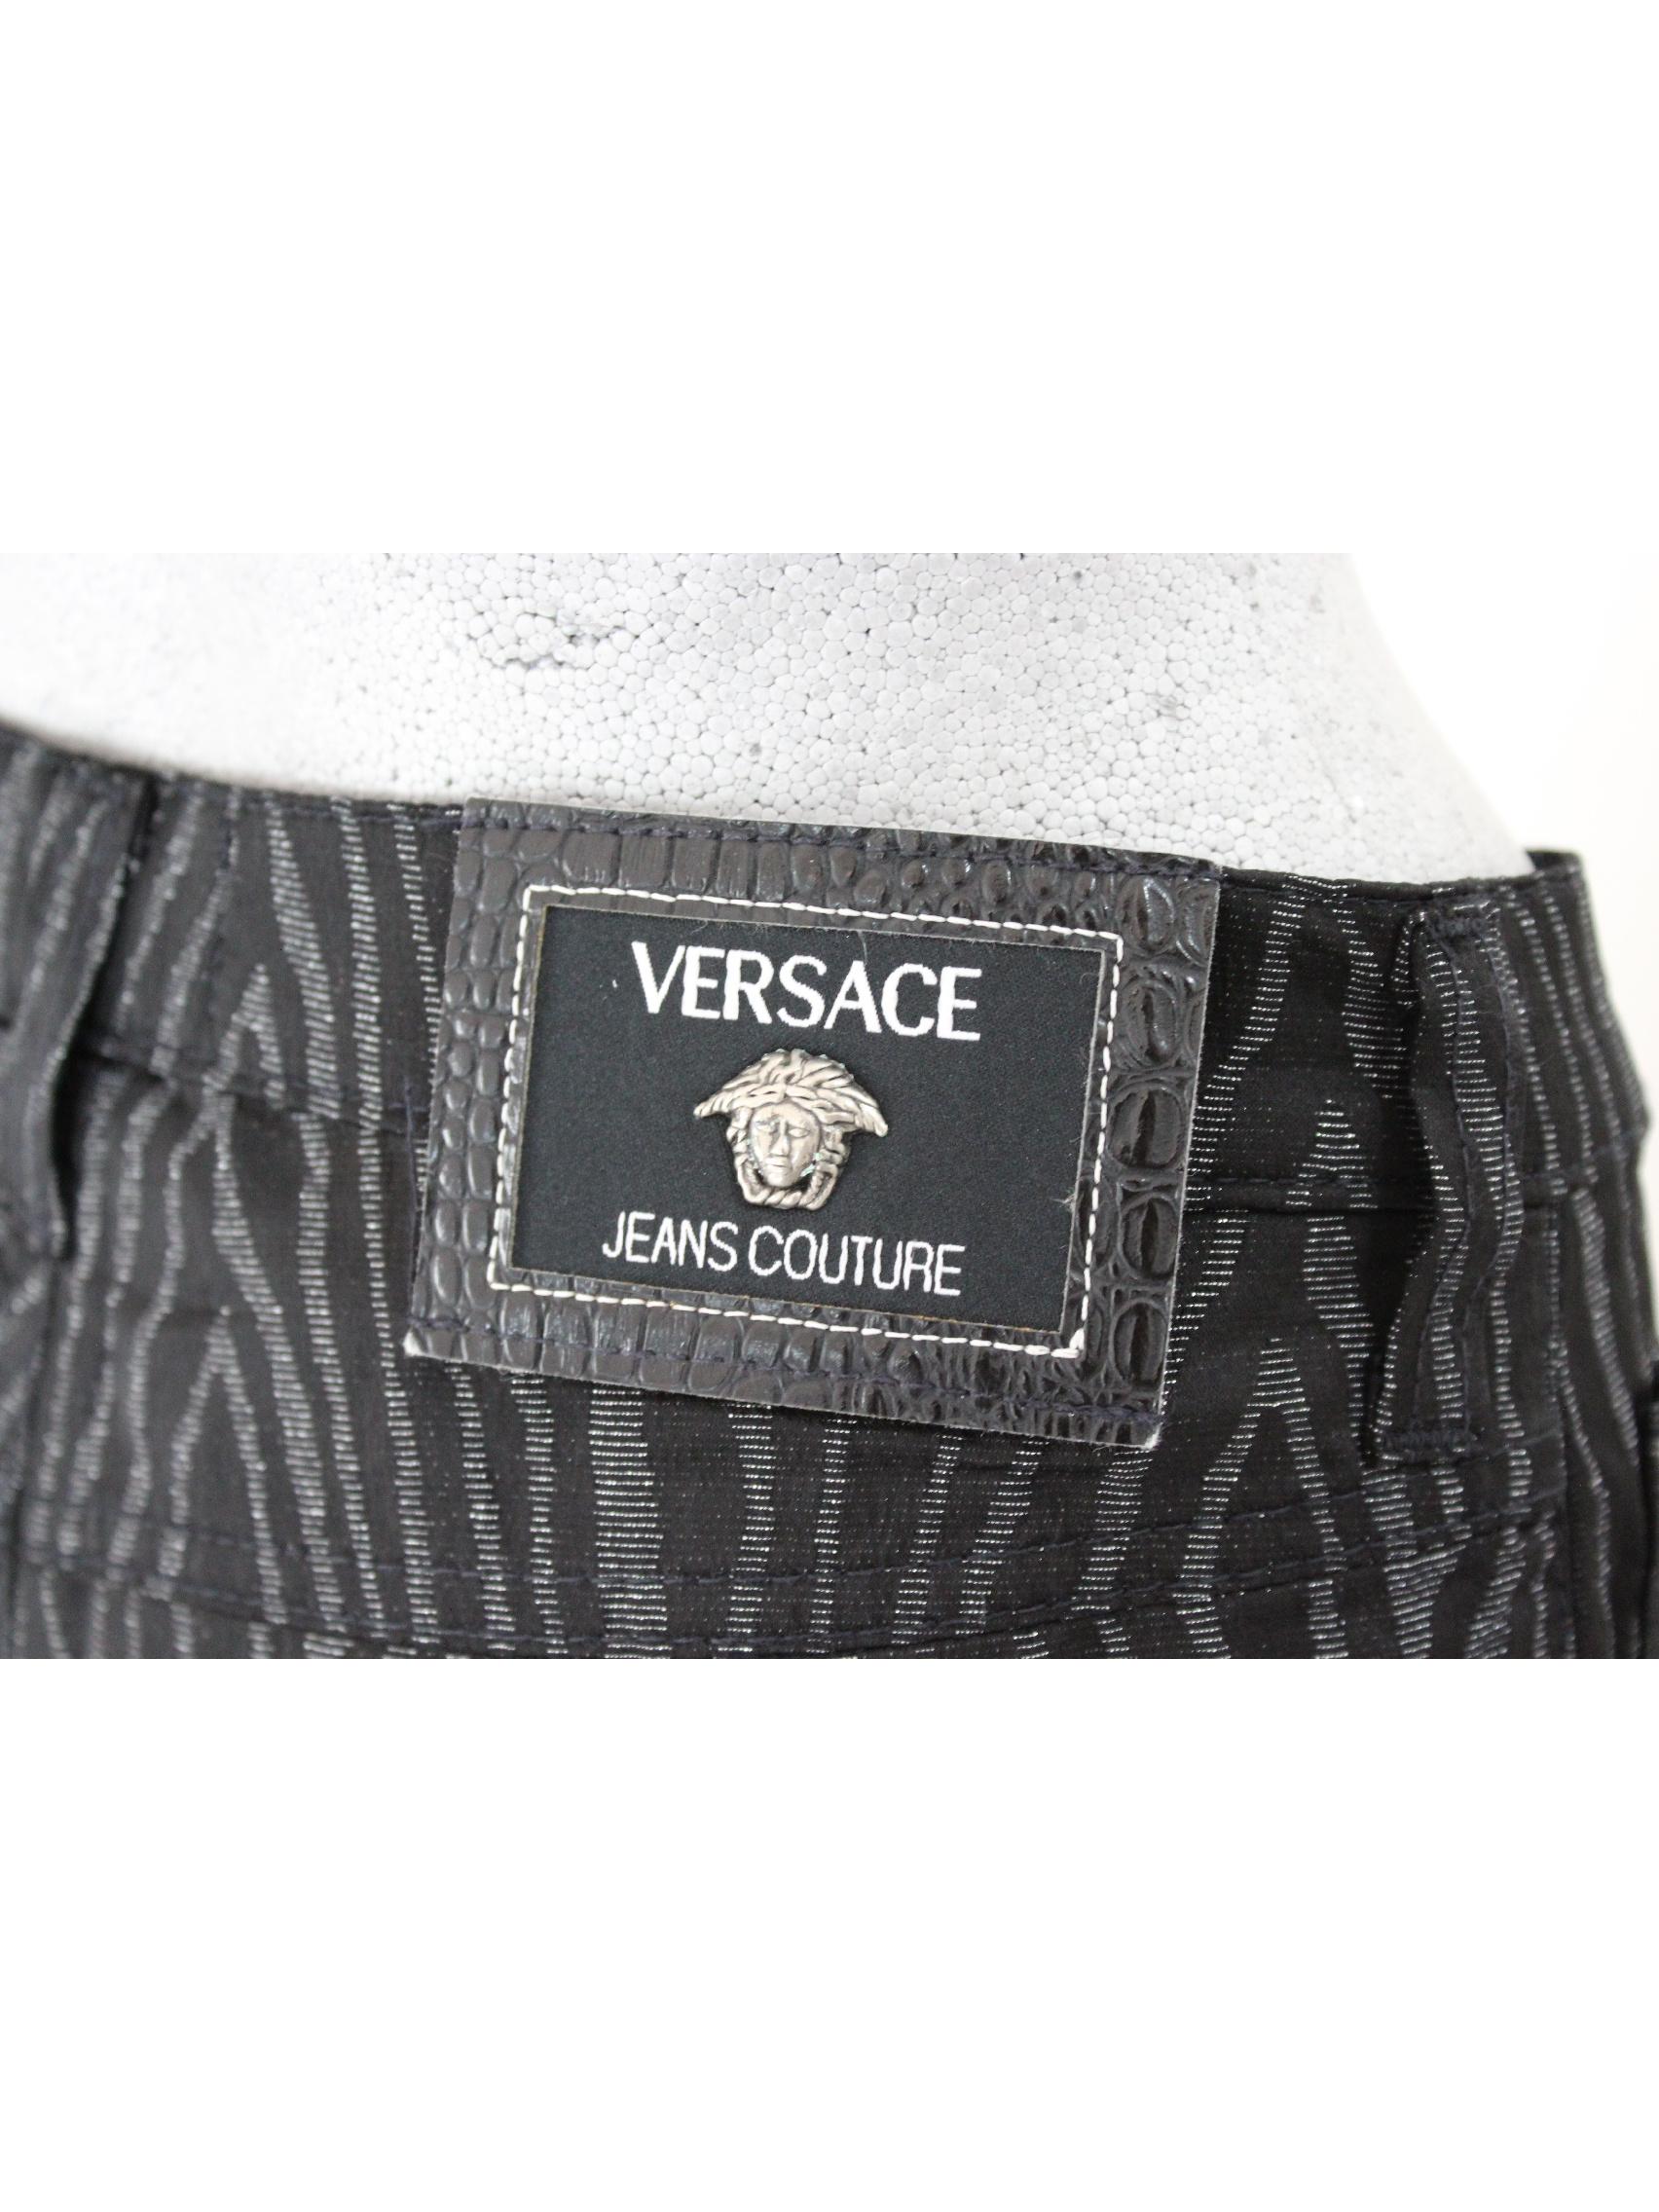 Gianni Versace Black Gray Pinstripe Spotted Lurex Trousers 2